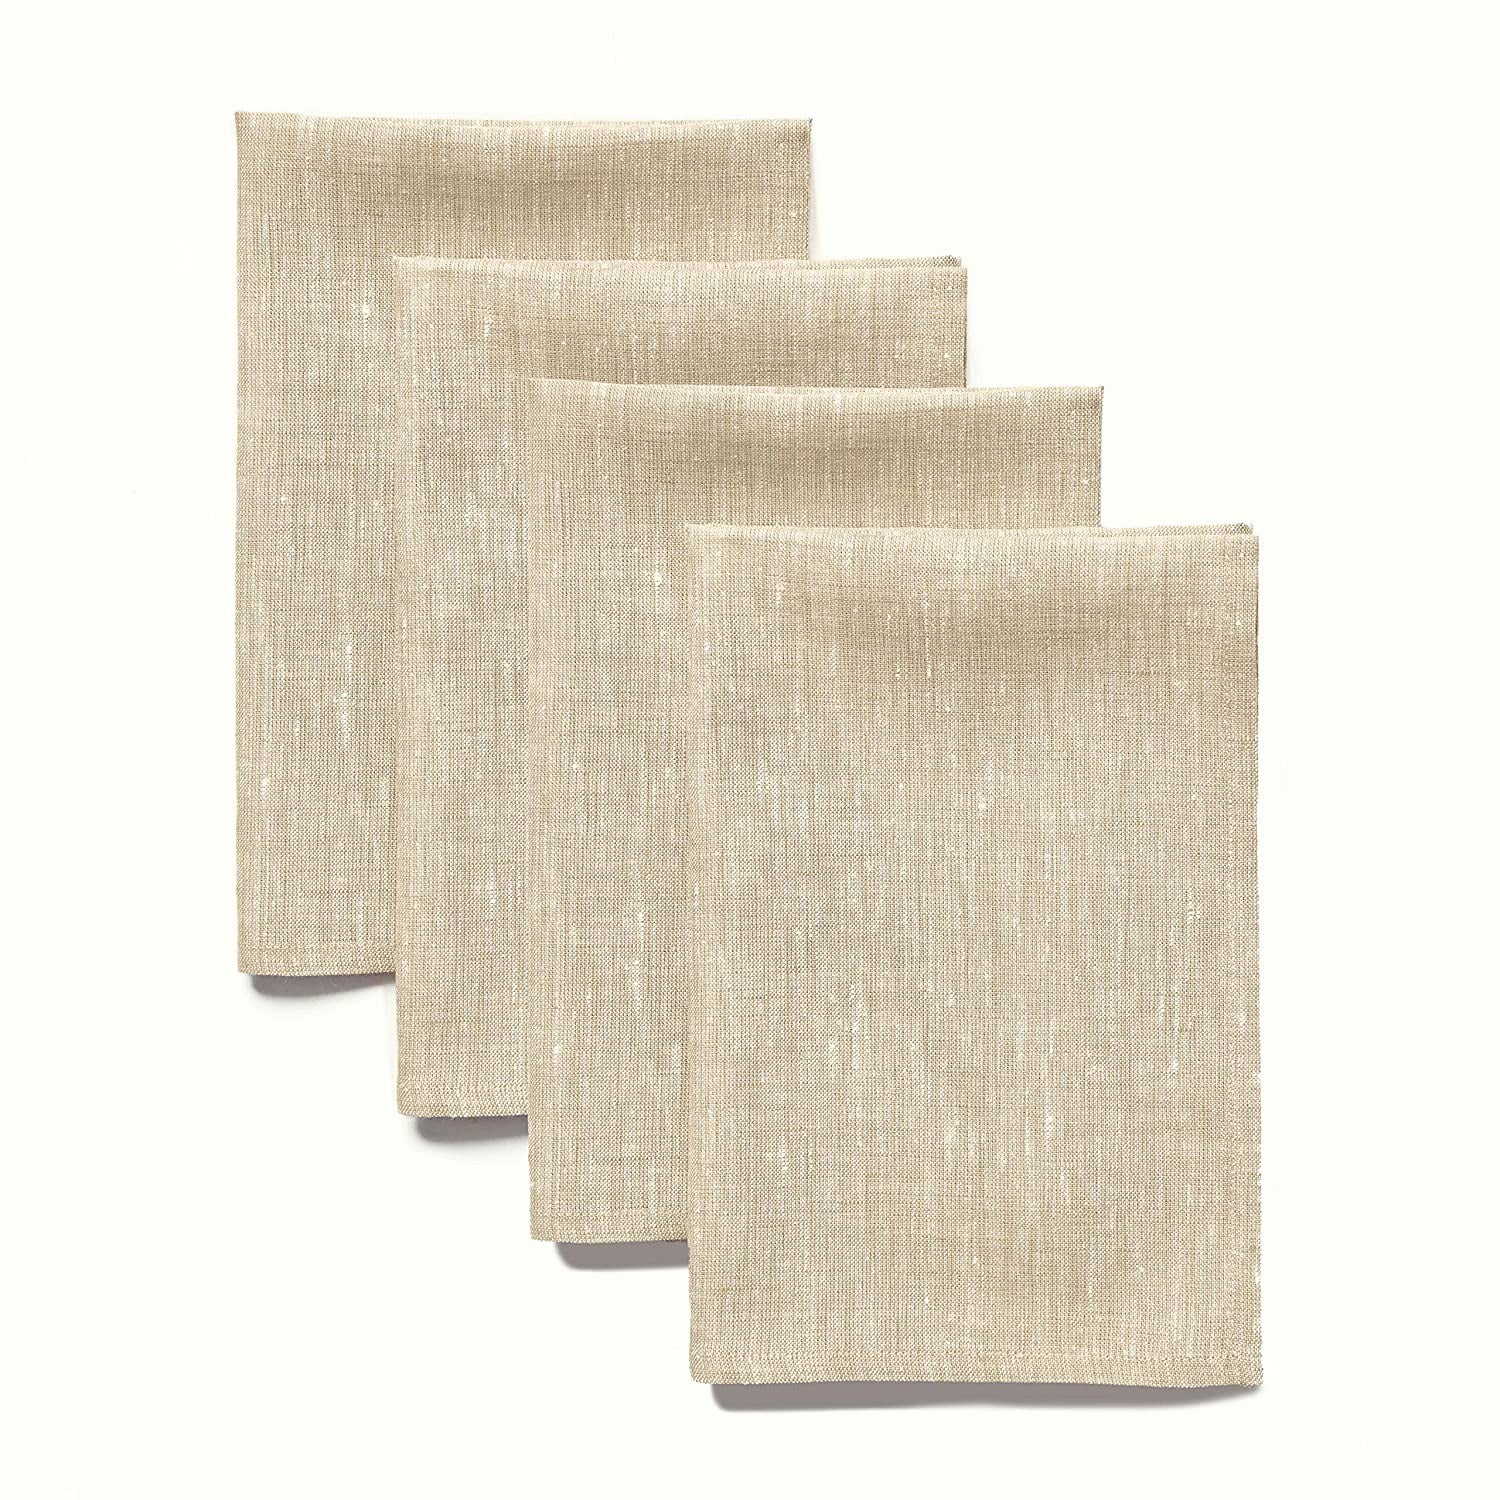 14 x 72 Inch European Flax Table Runner Olive Solino Home Medium Weight Linen Table Runner 100% Pure Linen Natural Fabric